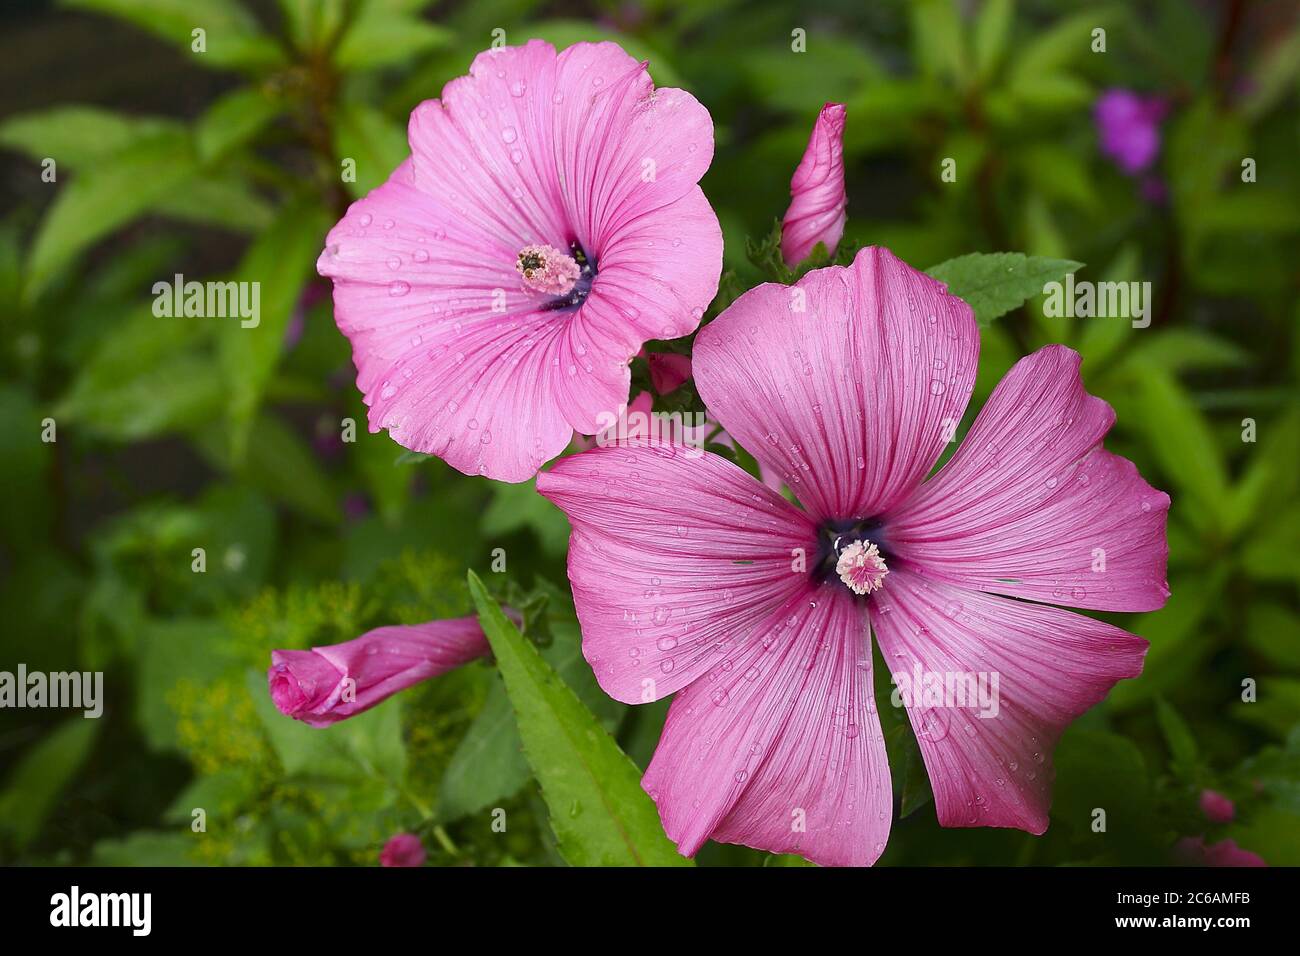 Mallow flower with dew drops on the petals Stock Photo